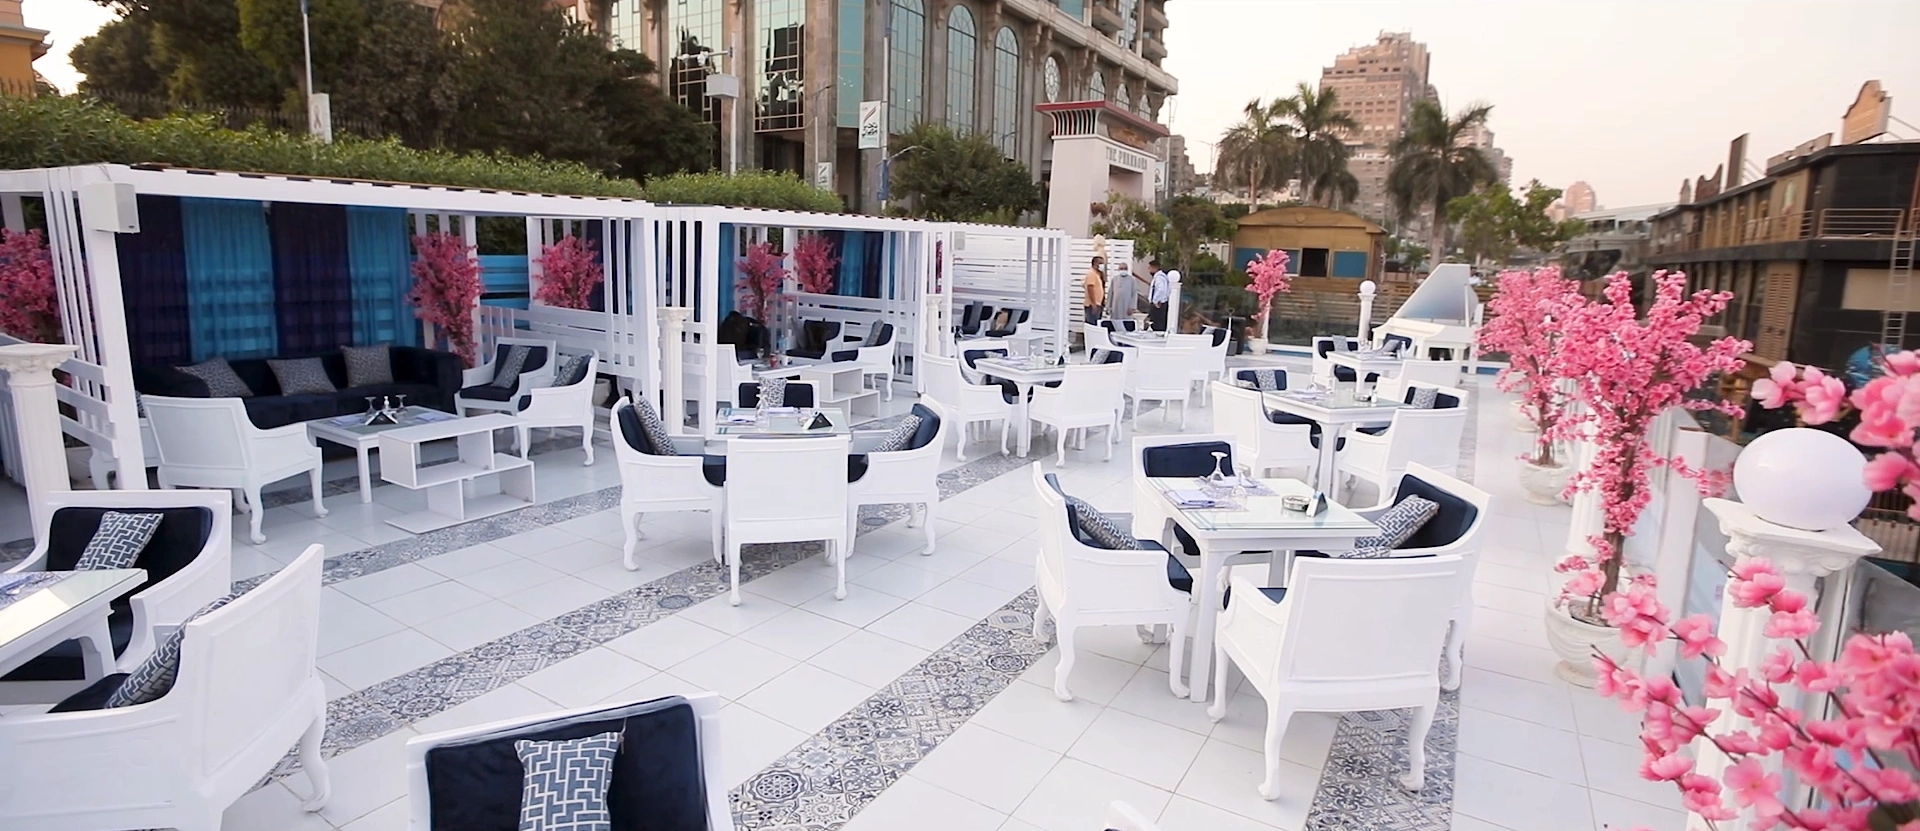 overview-tables-and-chairs-of-neilos-cafe-and-restaurant